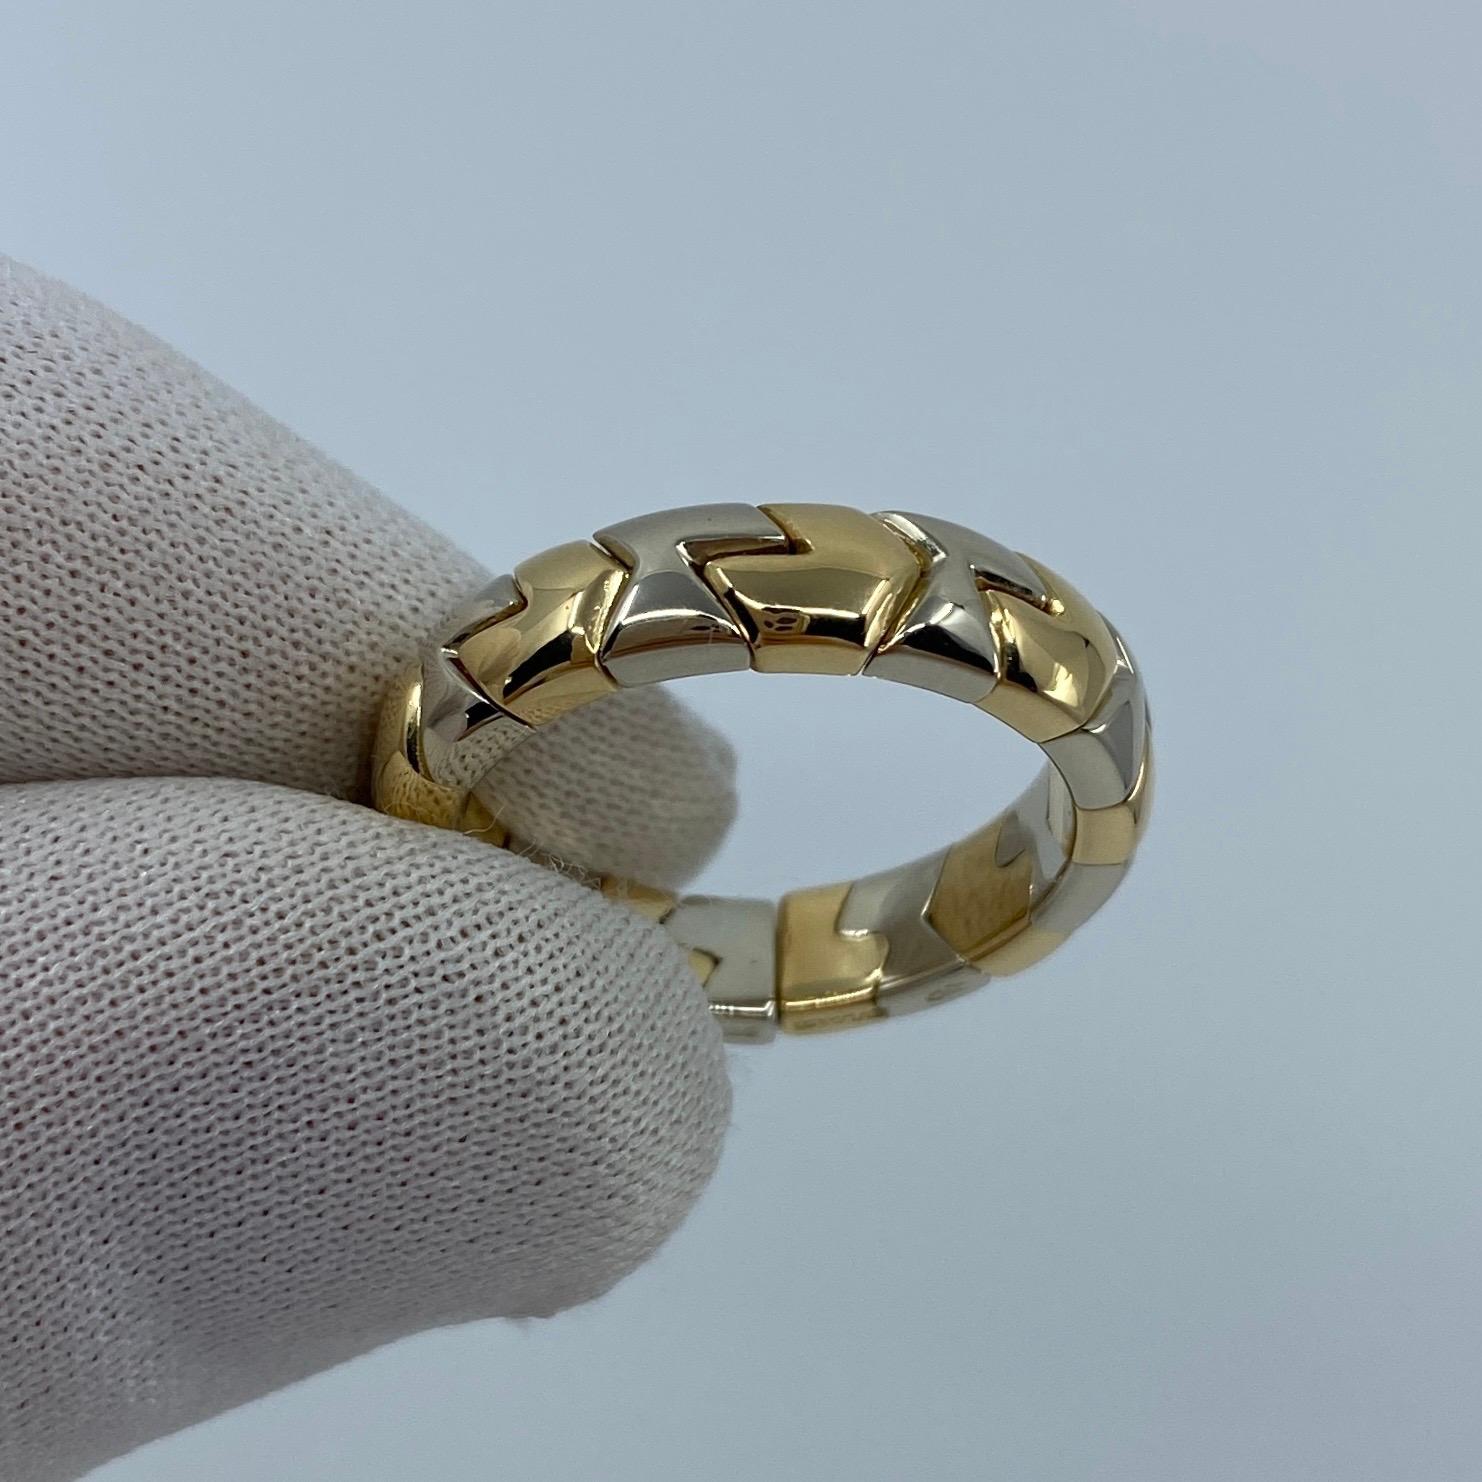 Very Rare Vintage Bvlgari Alveare 18k Yellow Gold & Steel Spring Thin Band Ring 1